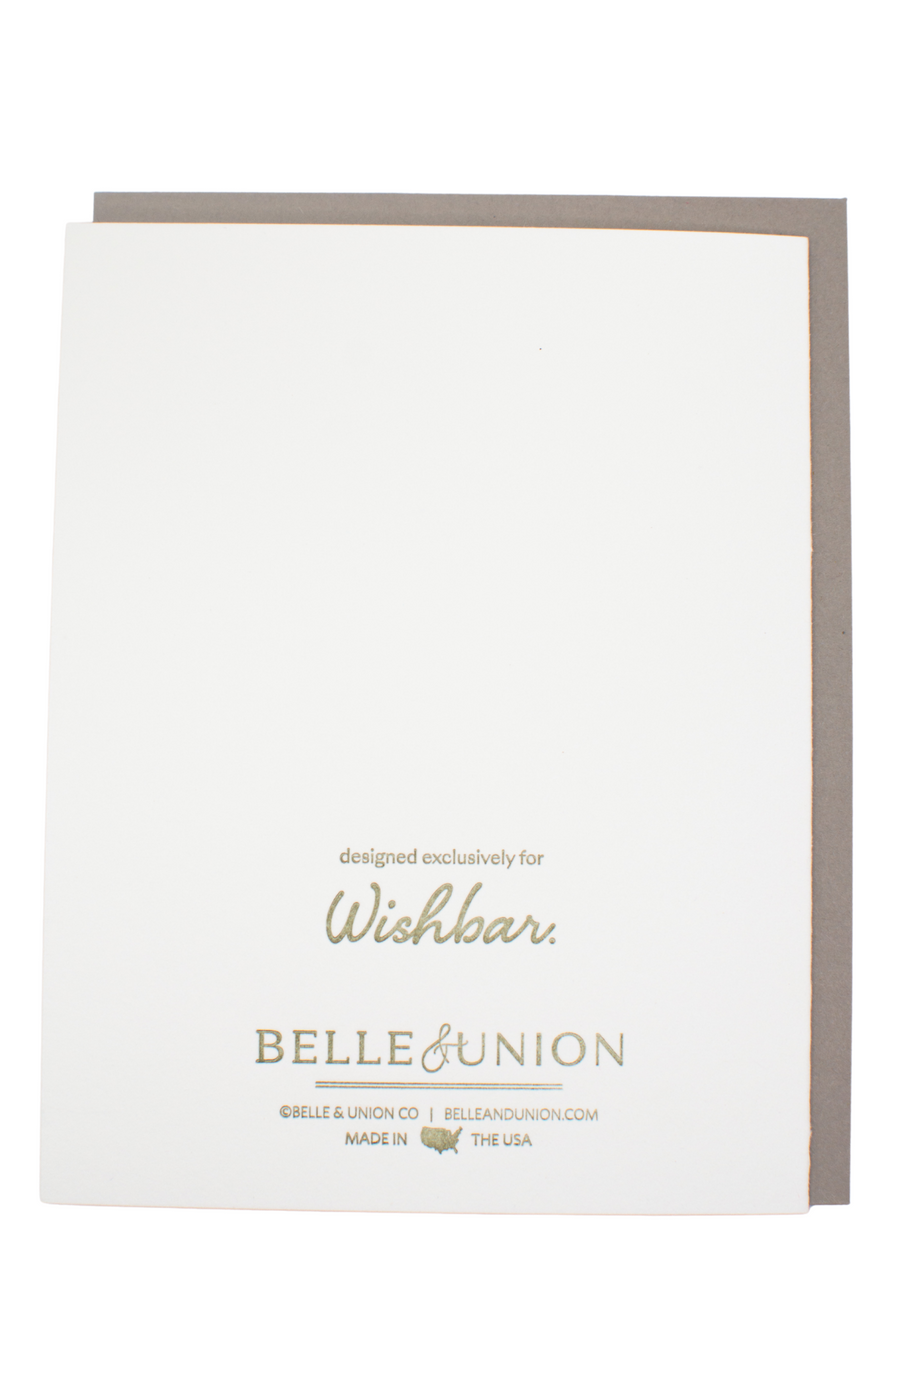 Back of the card. Designed exclusively for Wishbar. Belle and Union. 